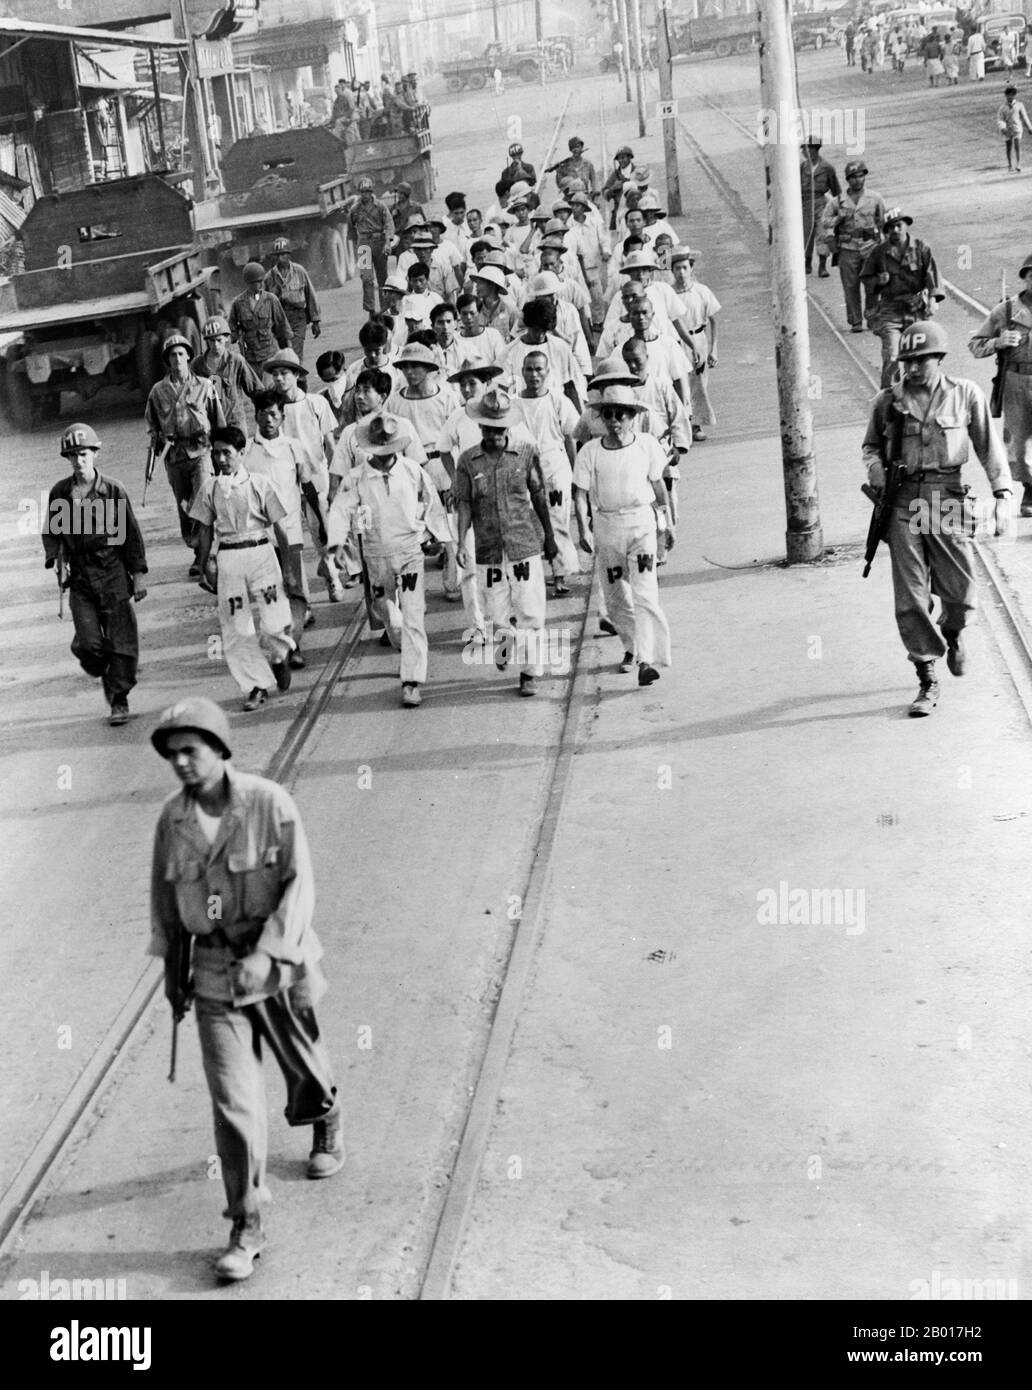 Philippines: Japanese prisoners of war under American military supervision, 1945.  Japanese prisoners of war helping in the massive cleanup after the Battle of Manila in 1945. Stock Photo